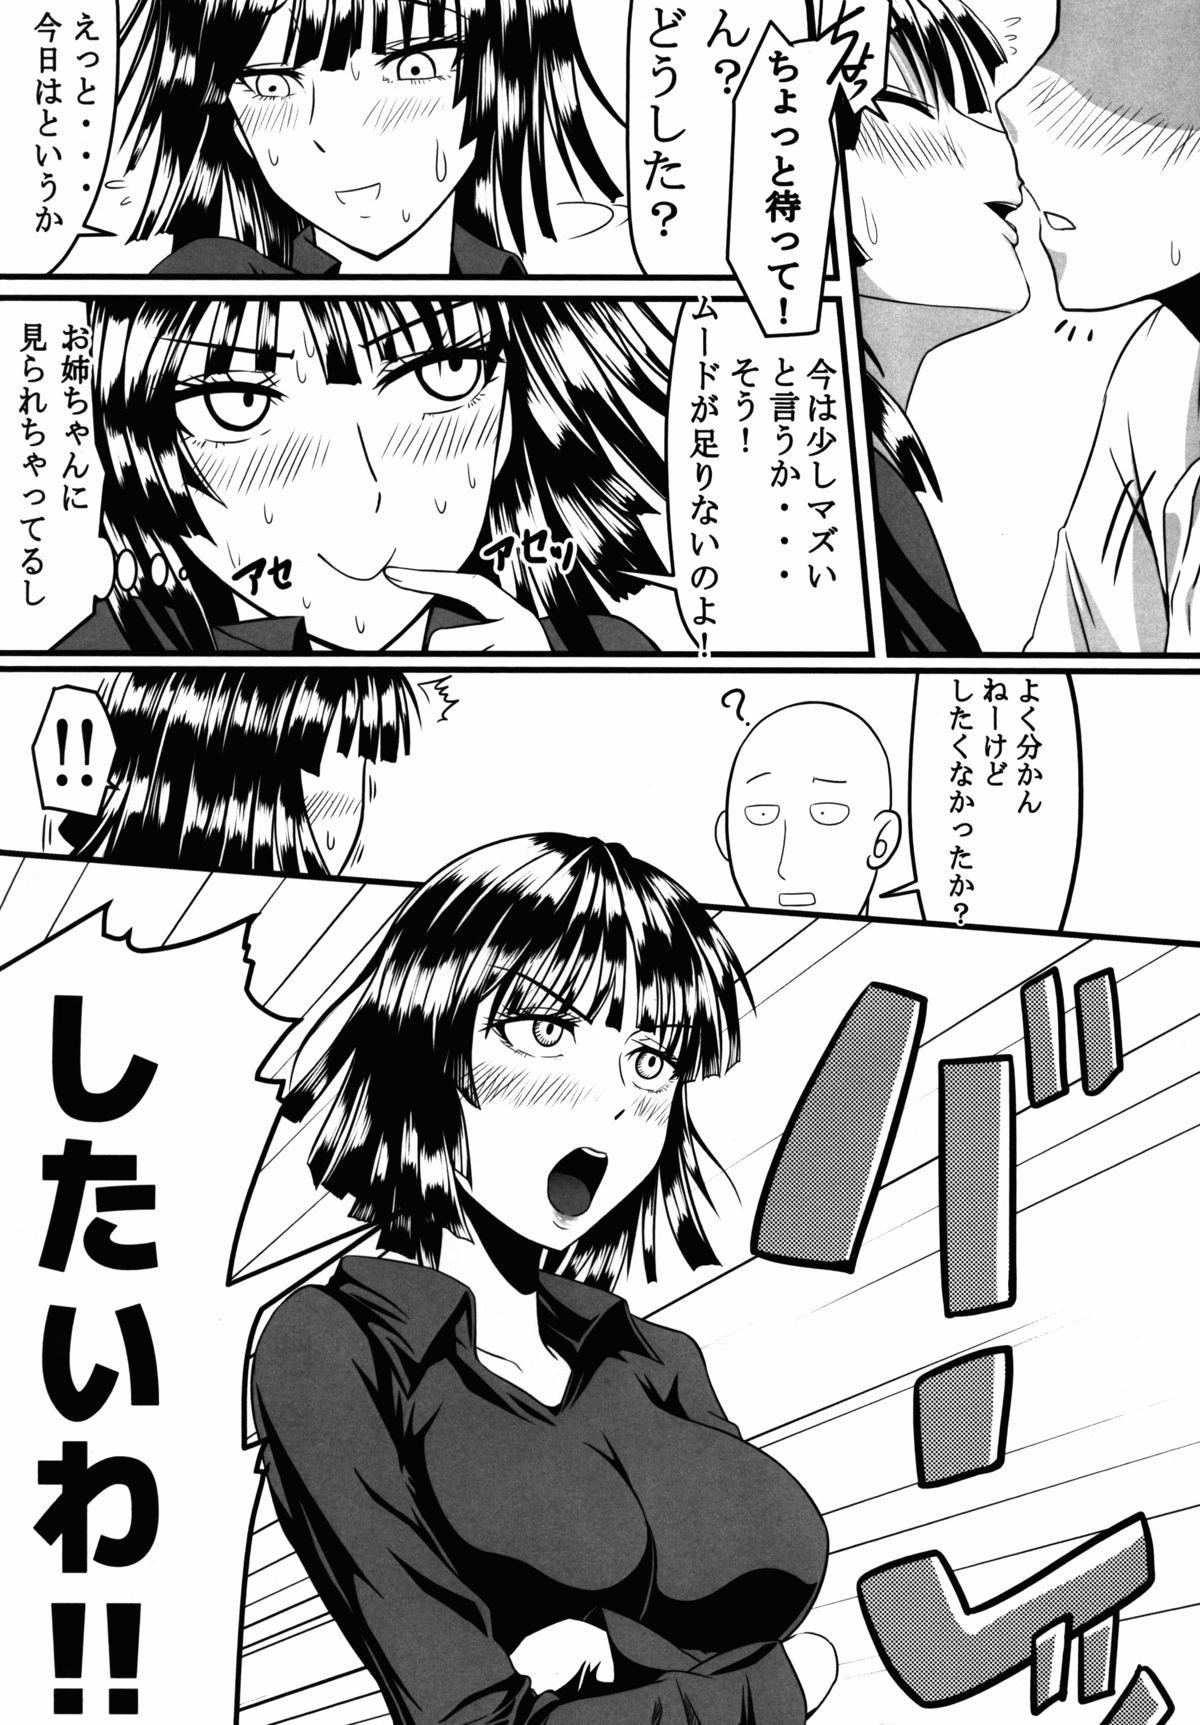 Free Porn Amateur Dekoboko Love sister - One punch man Ass To Mouth - Page 8